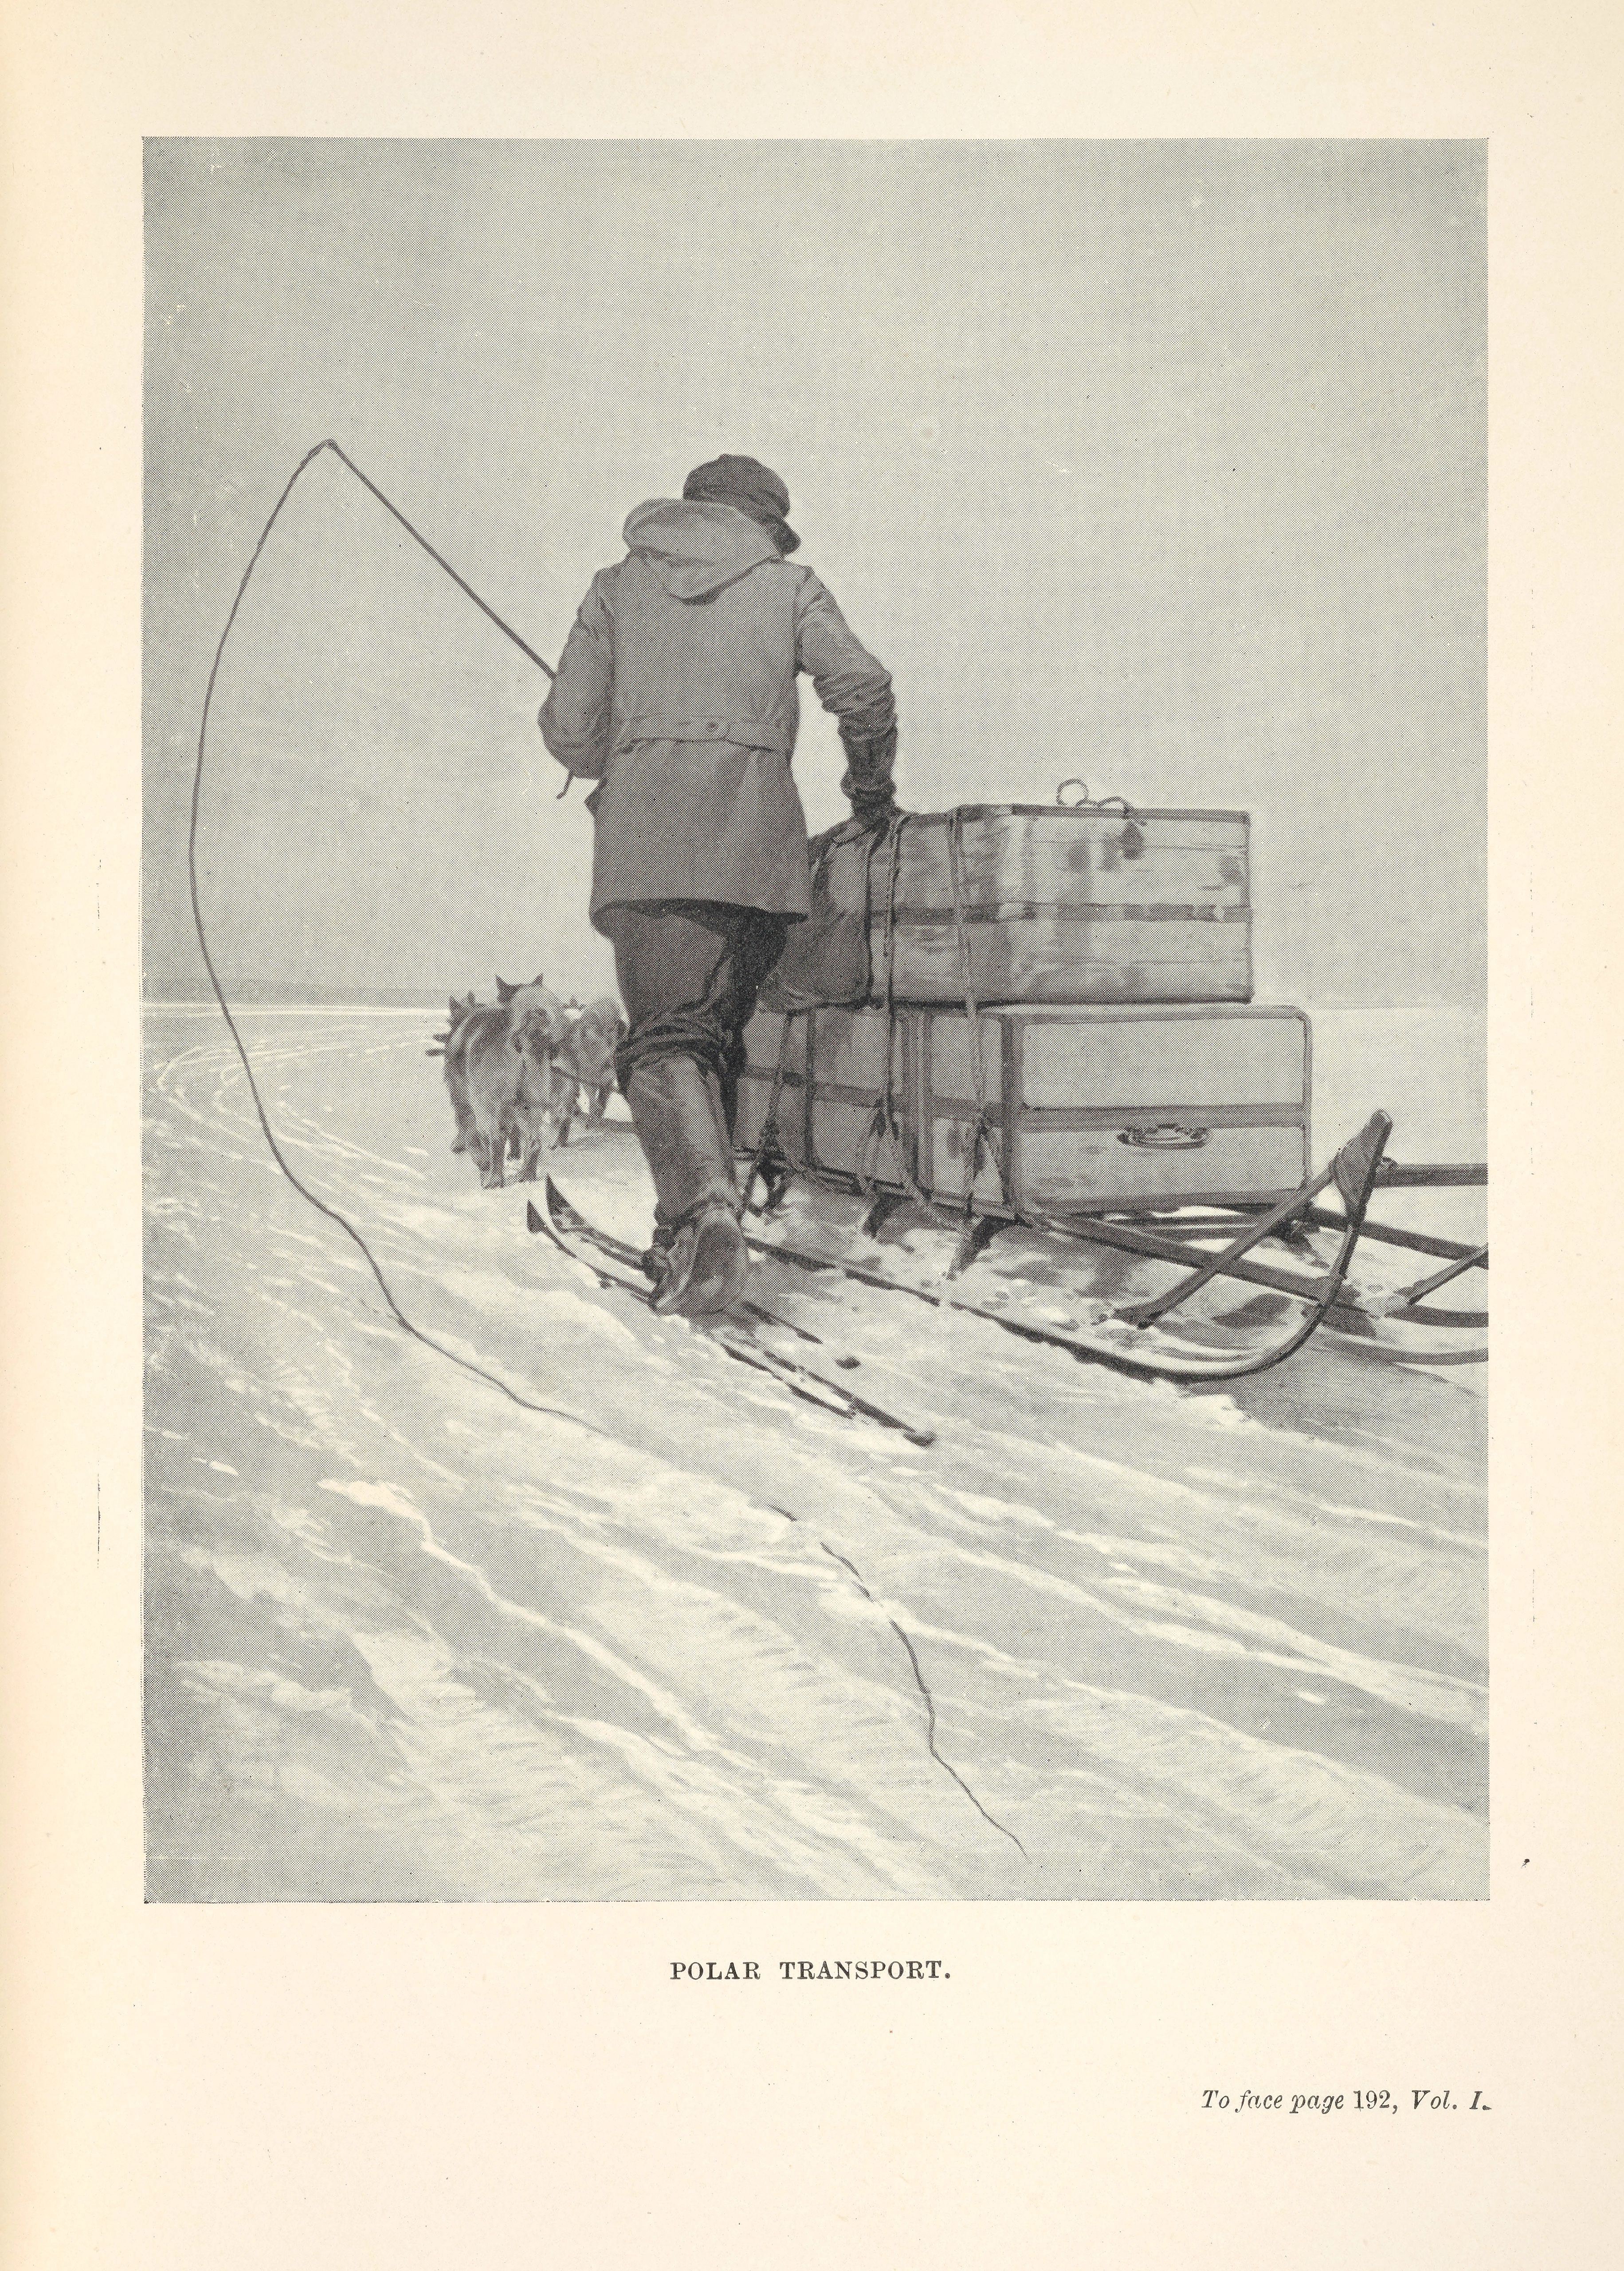 Sled dogs pulling cargo with man beside the cargo.